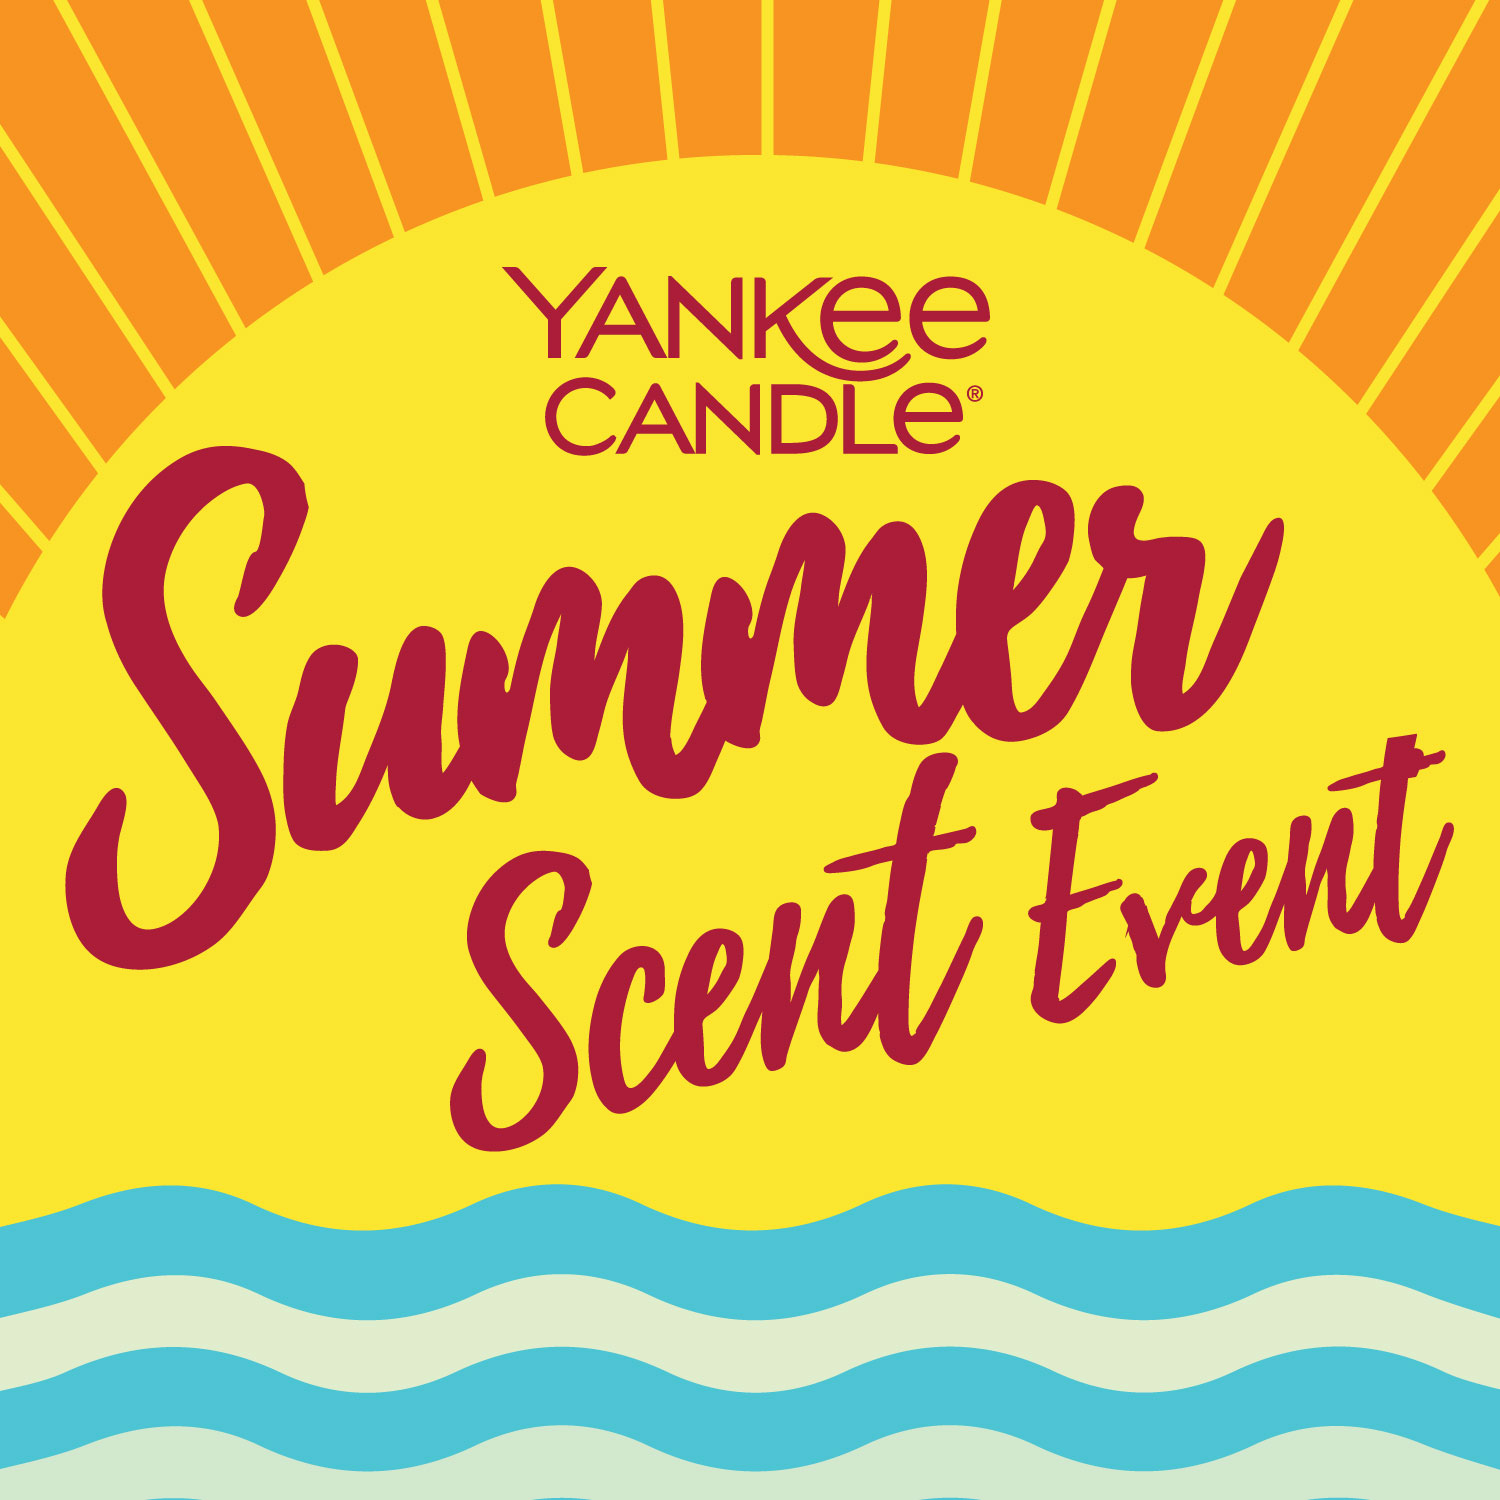 Yankee Candle Labor Day Sale: $1 Tart Wax Melts, Votive Candles & More